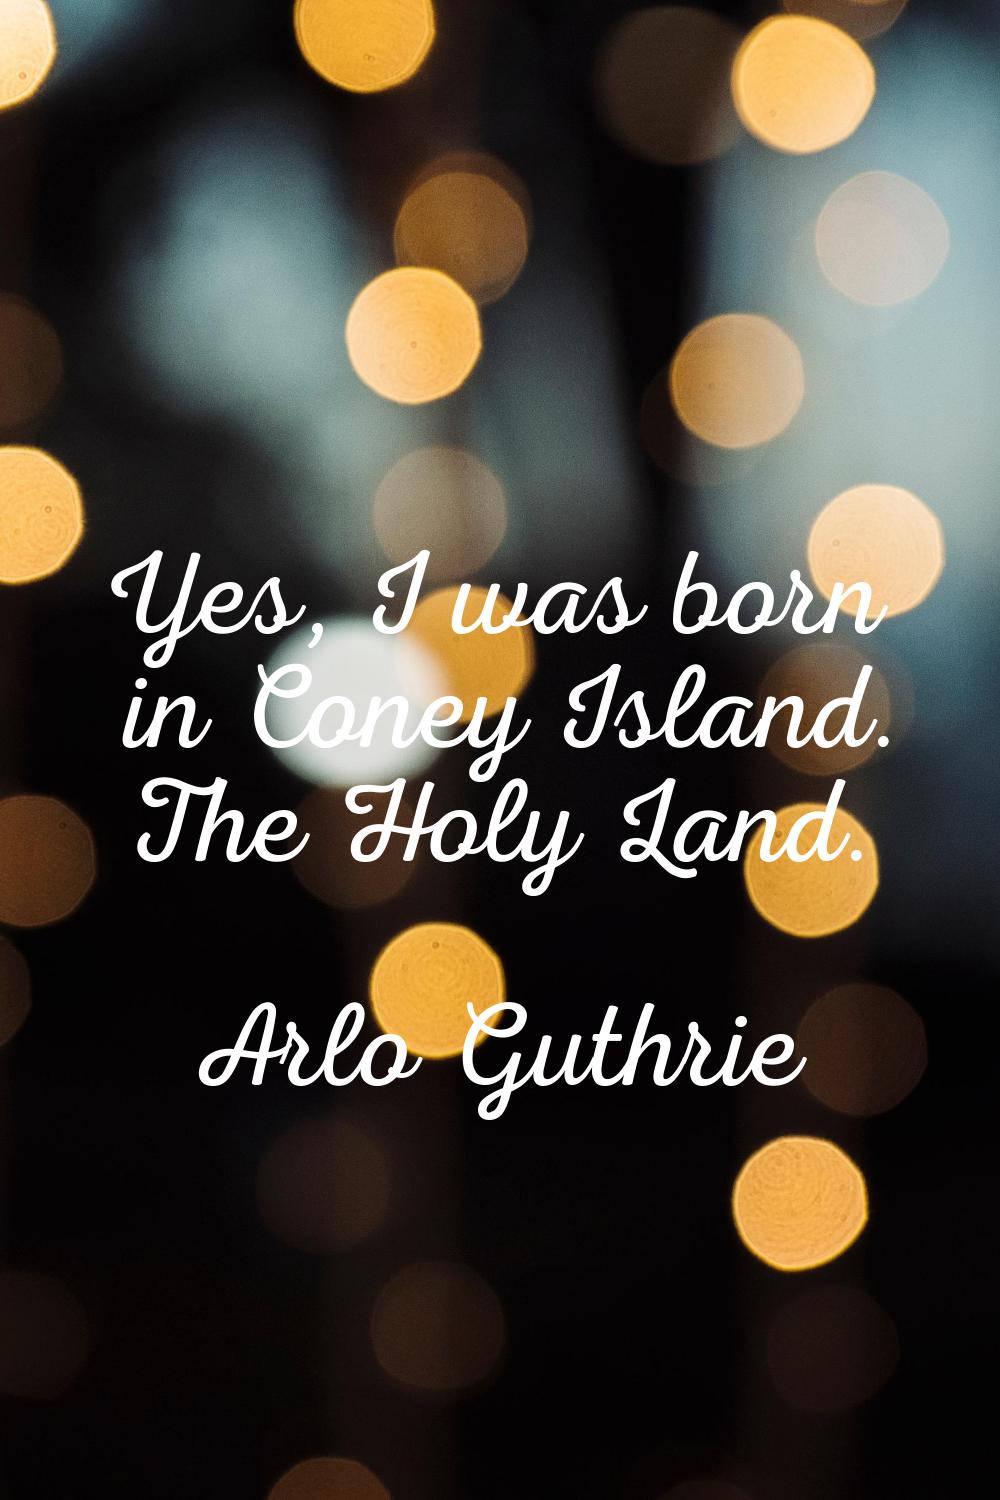 Yes, I was born in Coney Island. The Holy Land.